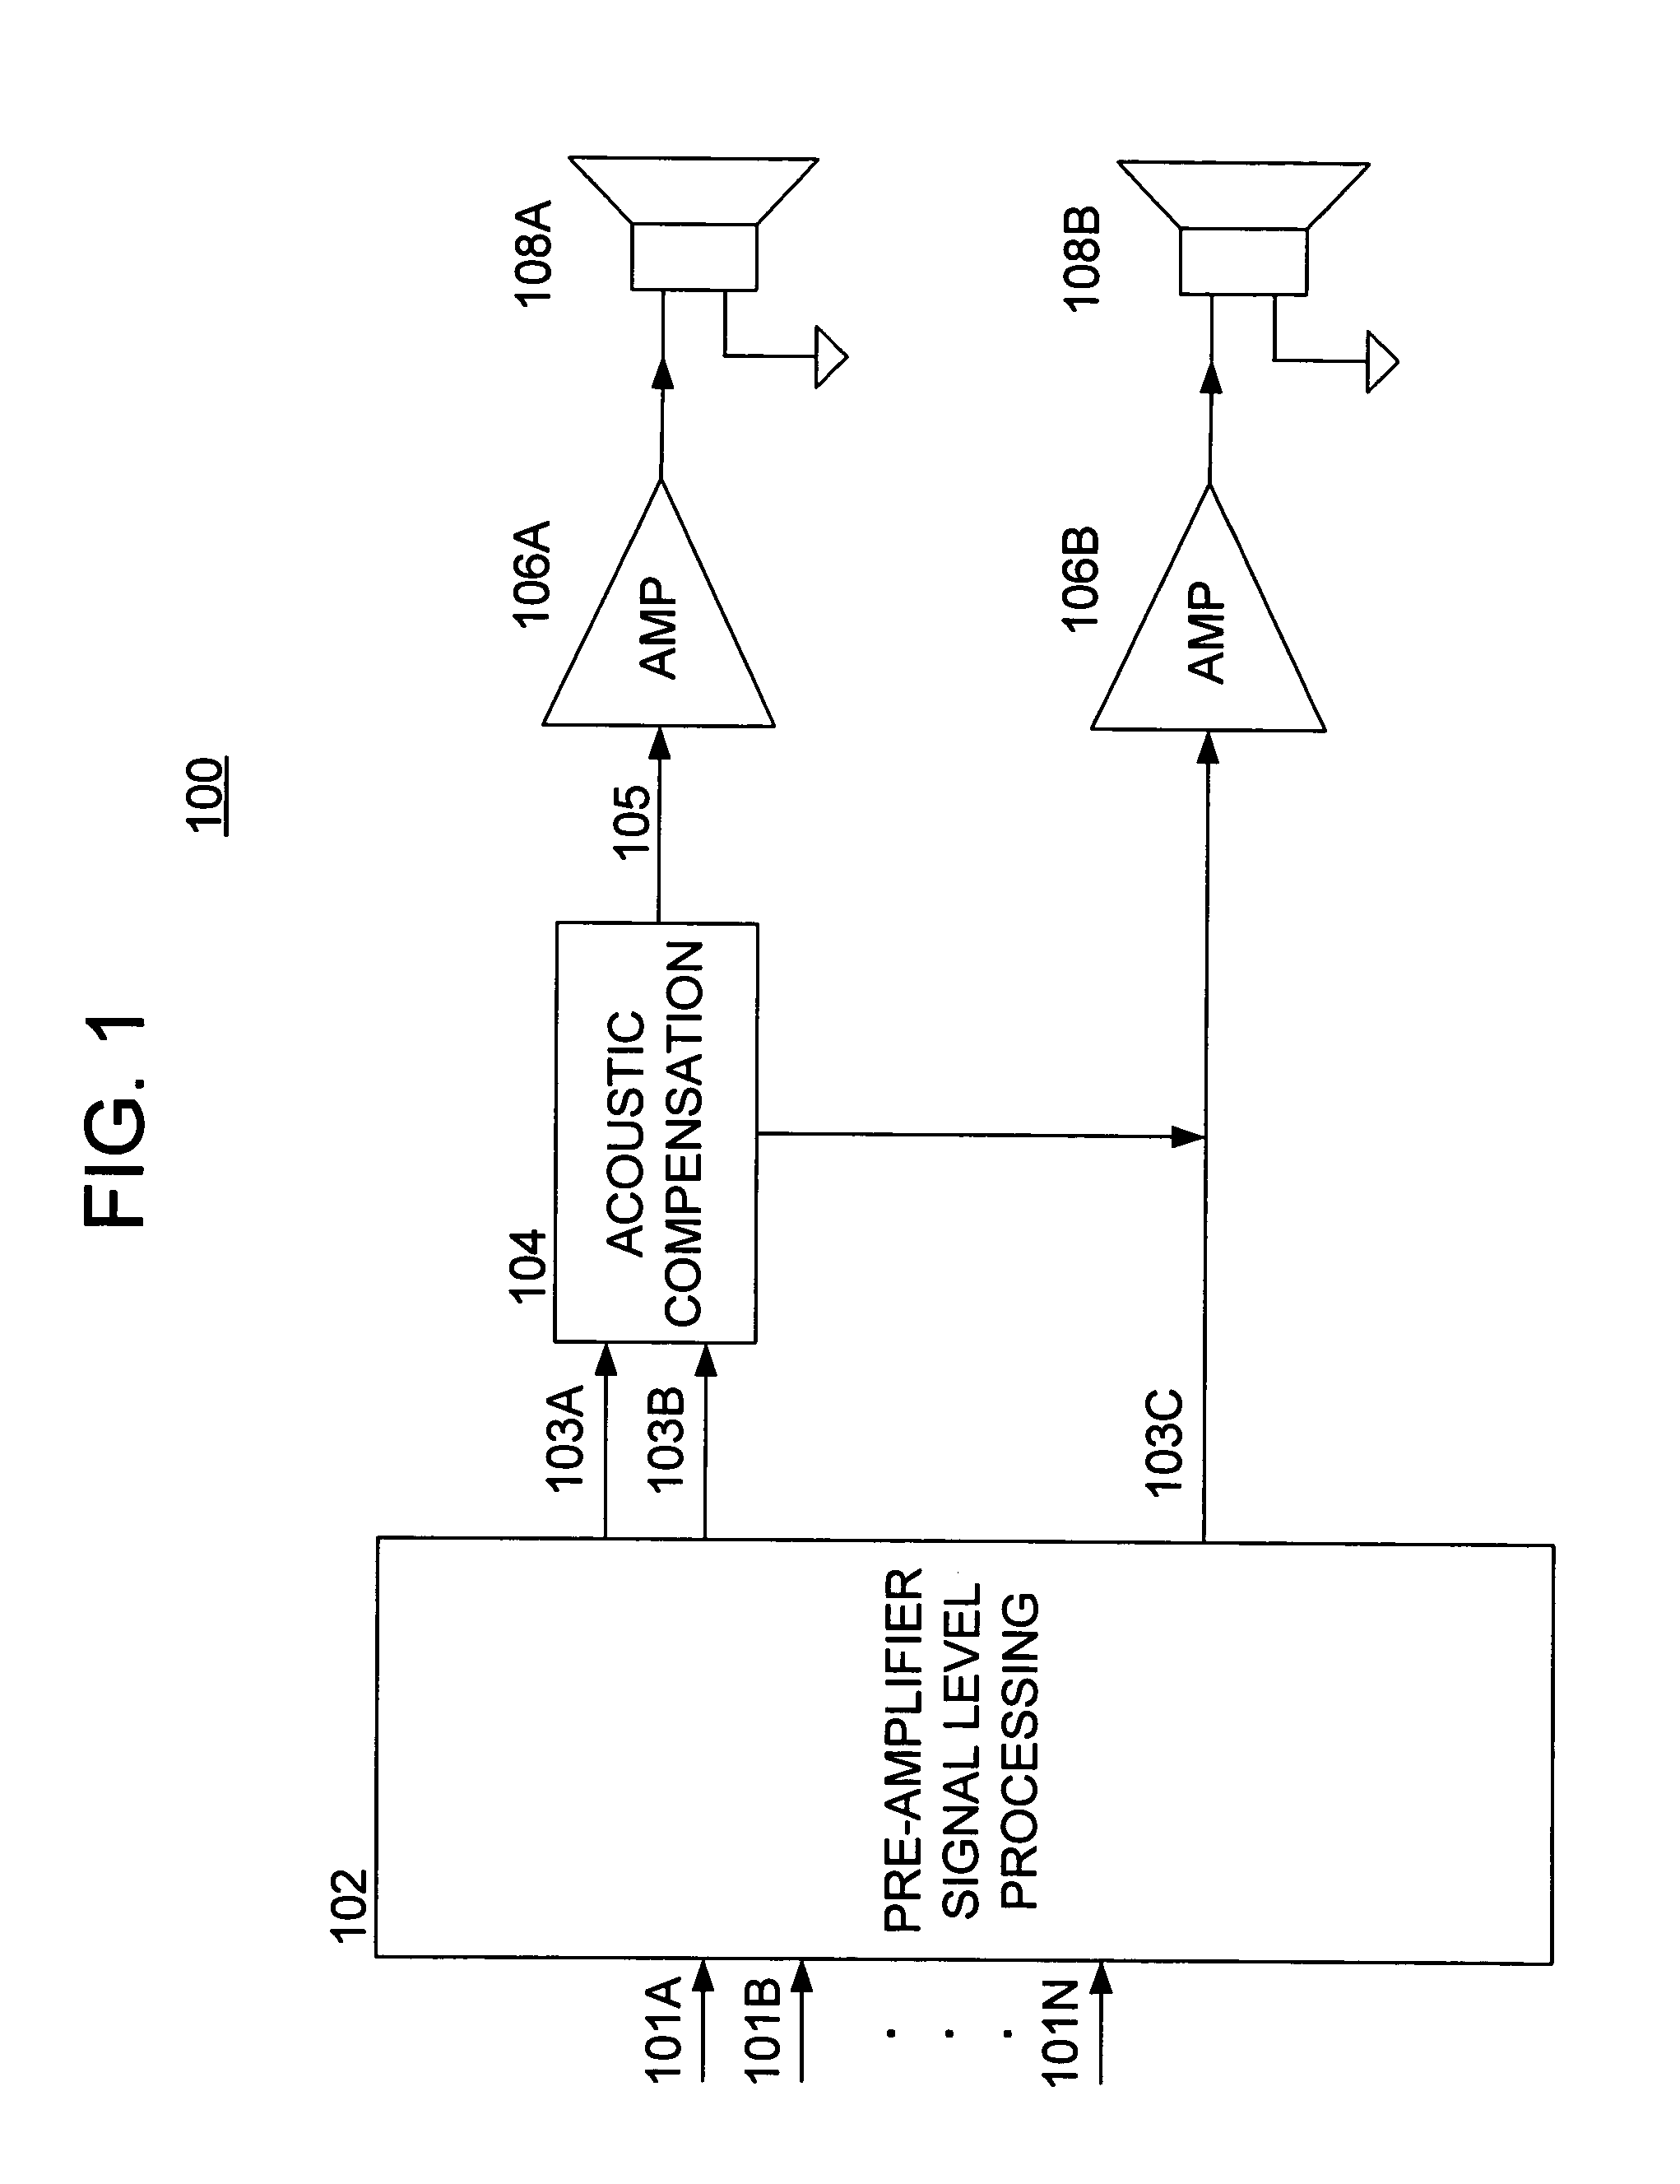 Methods and apparatus for sound compensation in an acoustic environment